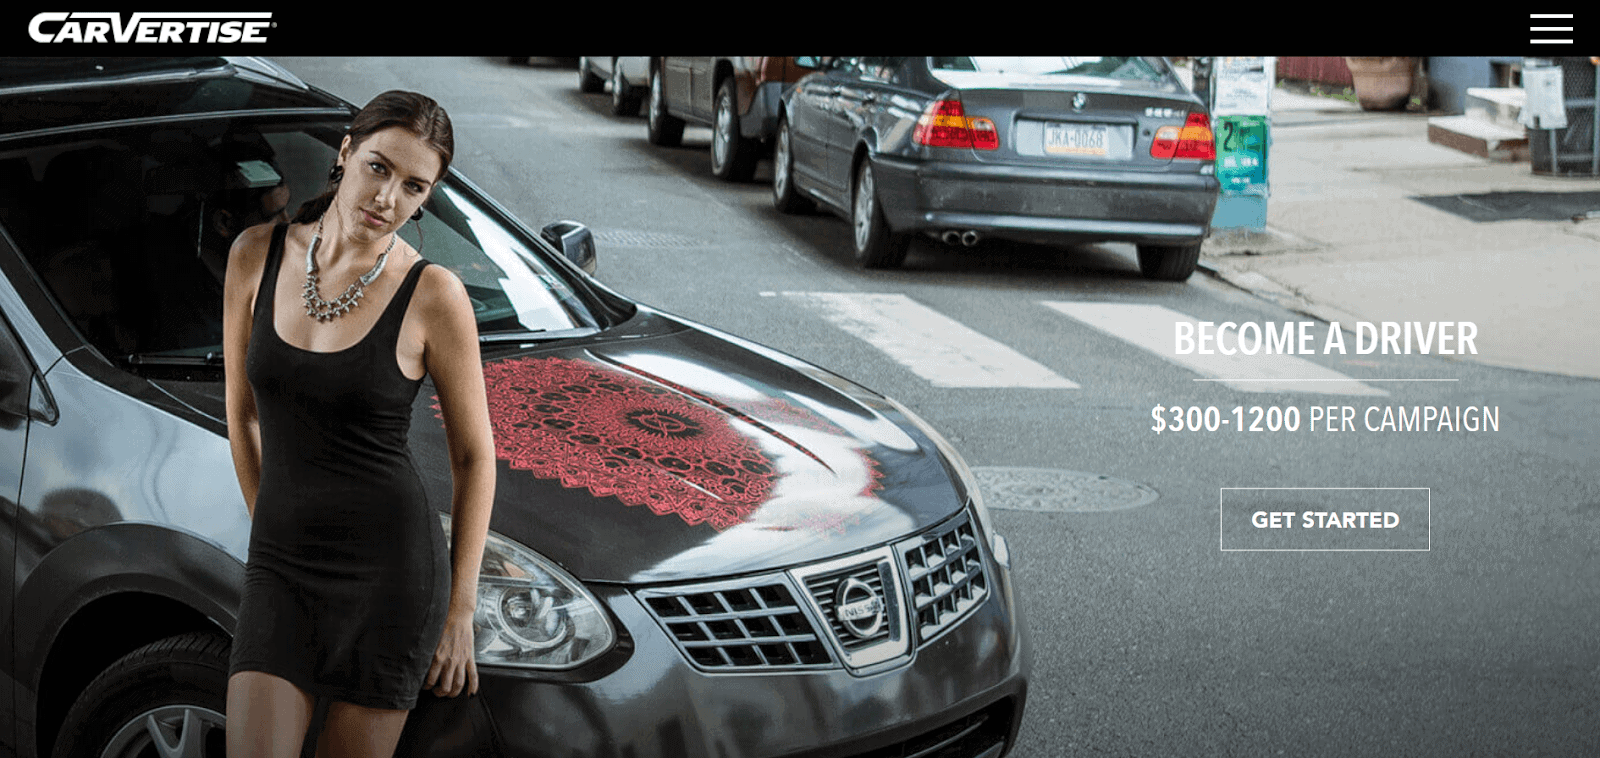 Become a driver page on Carvertise